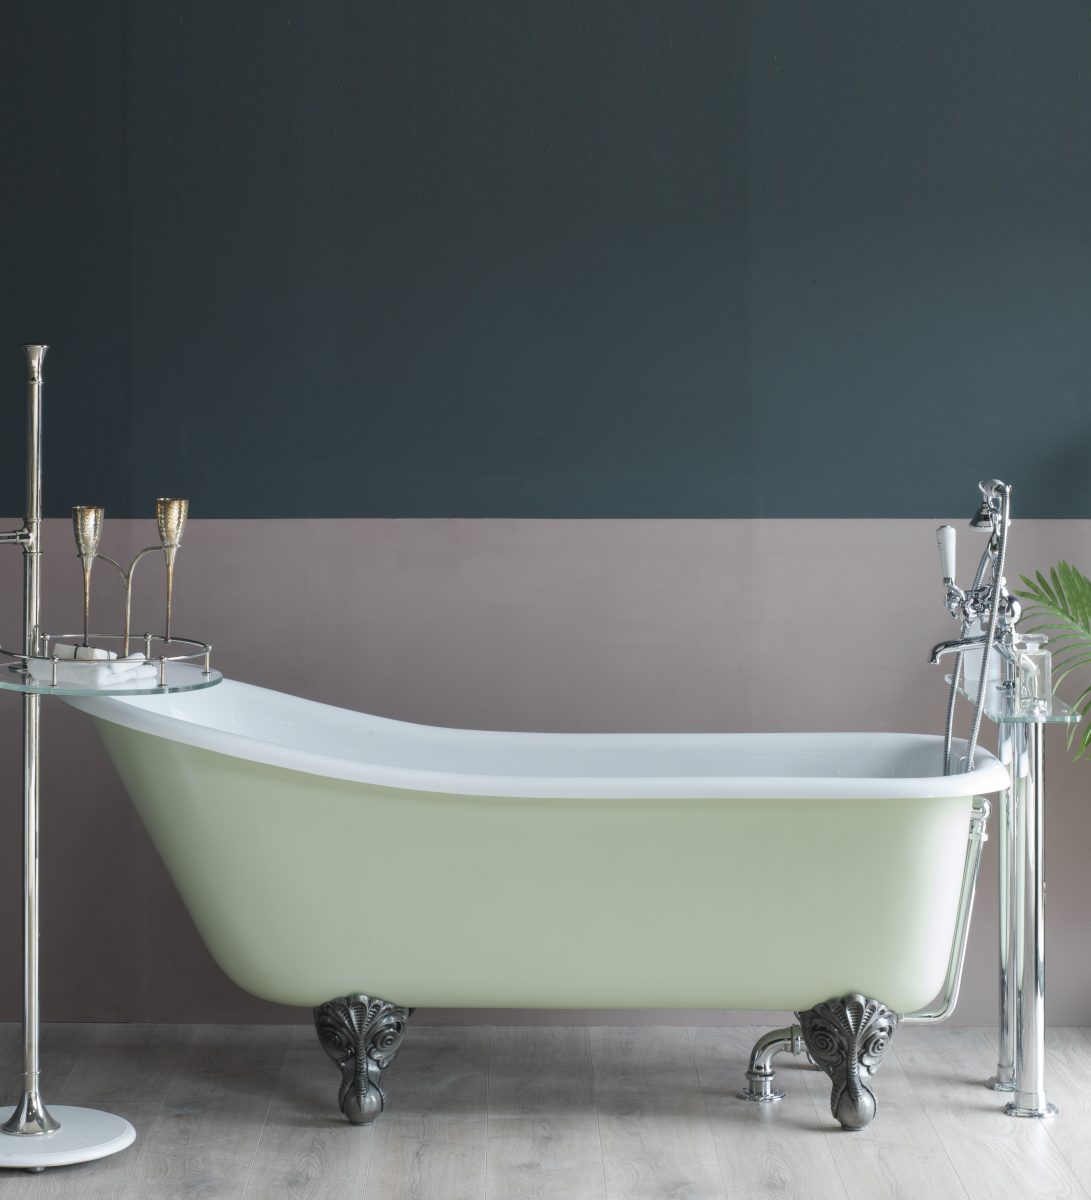 Neptune slipper bath - side on view. Bath shown with painted exterior and burnished iron feet.